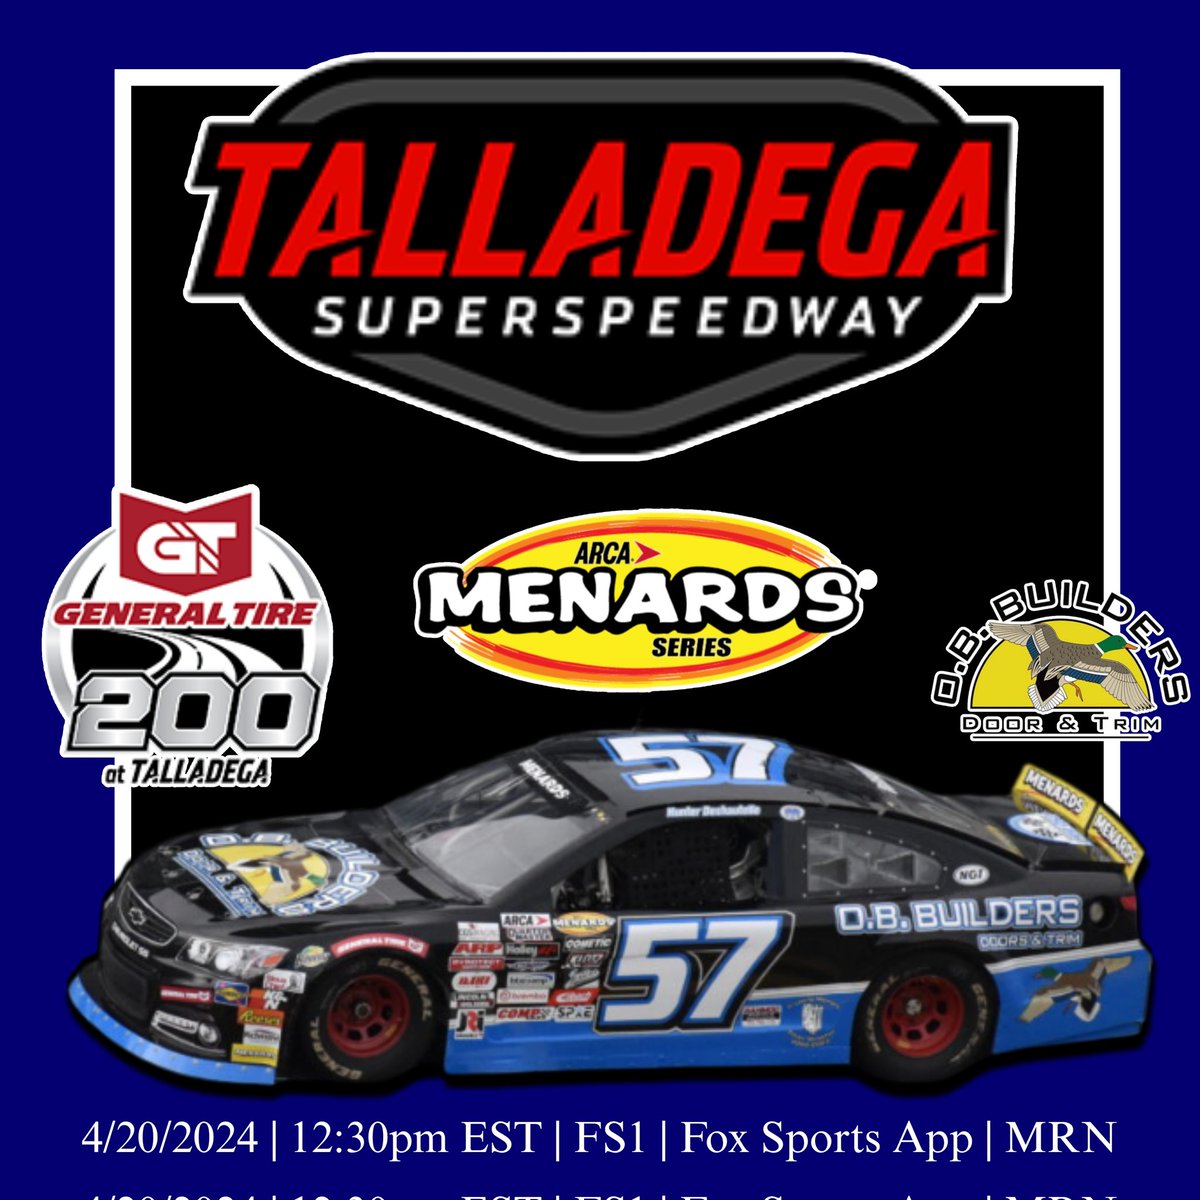 RACEDAY at DEGA!

Hunter Deshautelle will be taking the green flag for the General Tire 200 at Talladega at 12:30pm EST/11:30am EST on FS1.